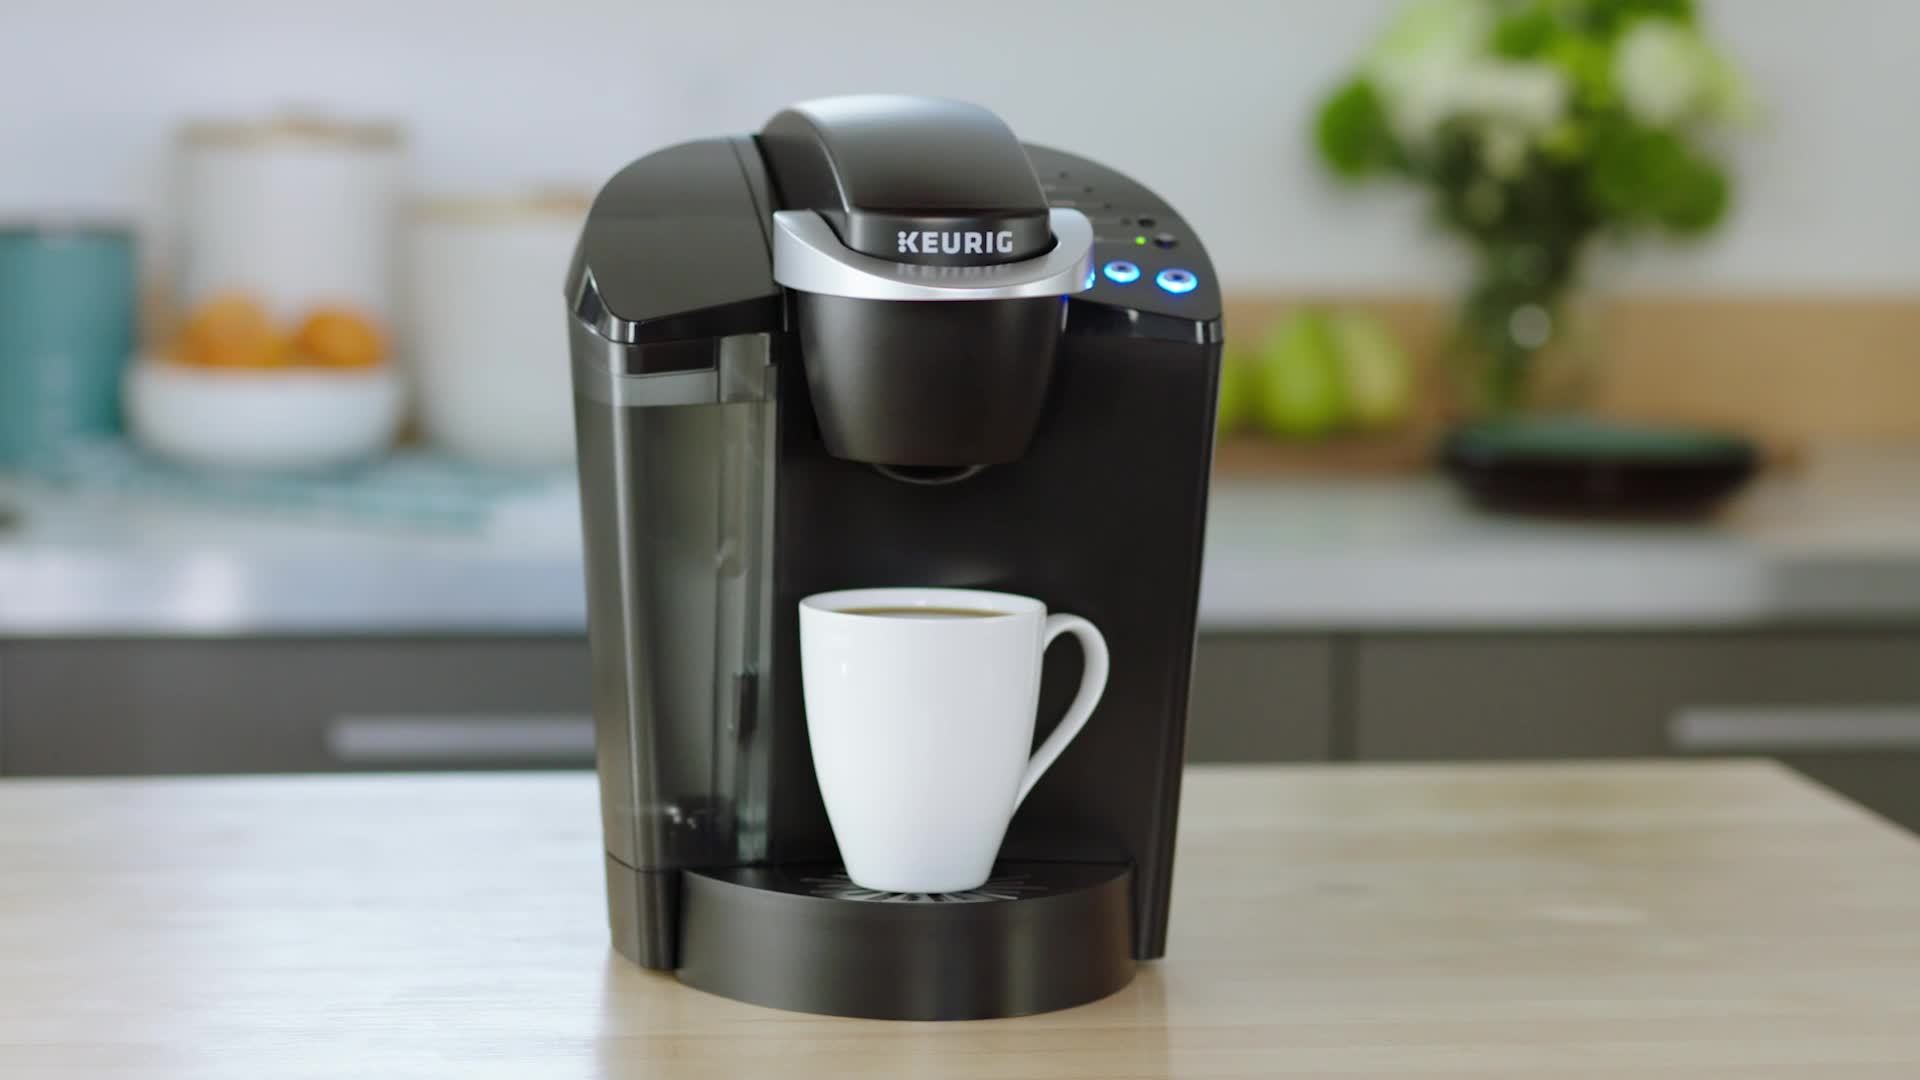 The Black Friday 2020 Keurig Coffee Maker Deals Not To Be Missed by all #Coffeelovers